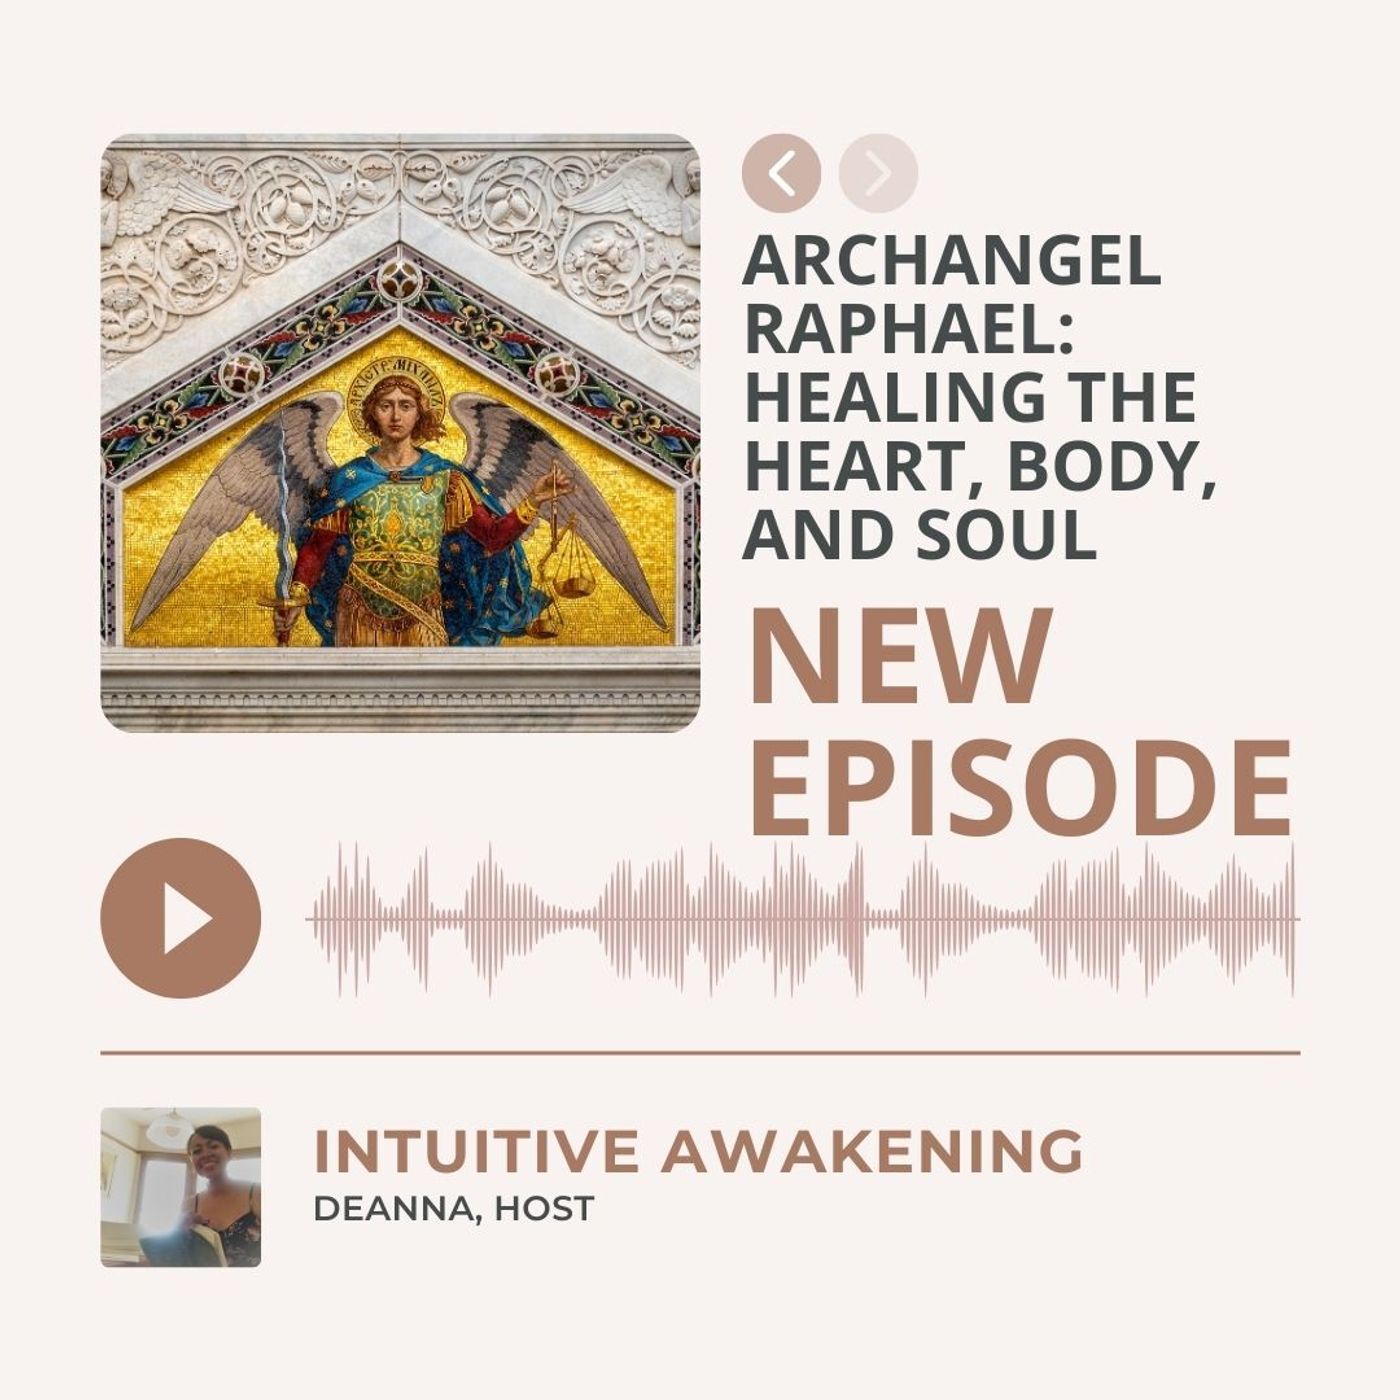 155: Healing the Heart, Body, and Soul with Archangel Raphael